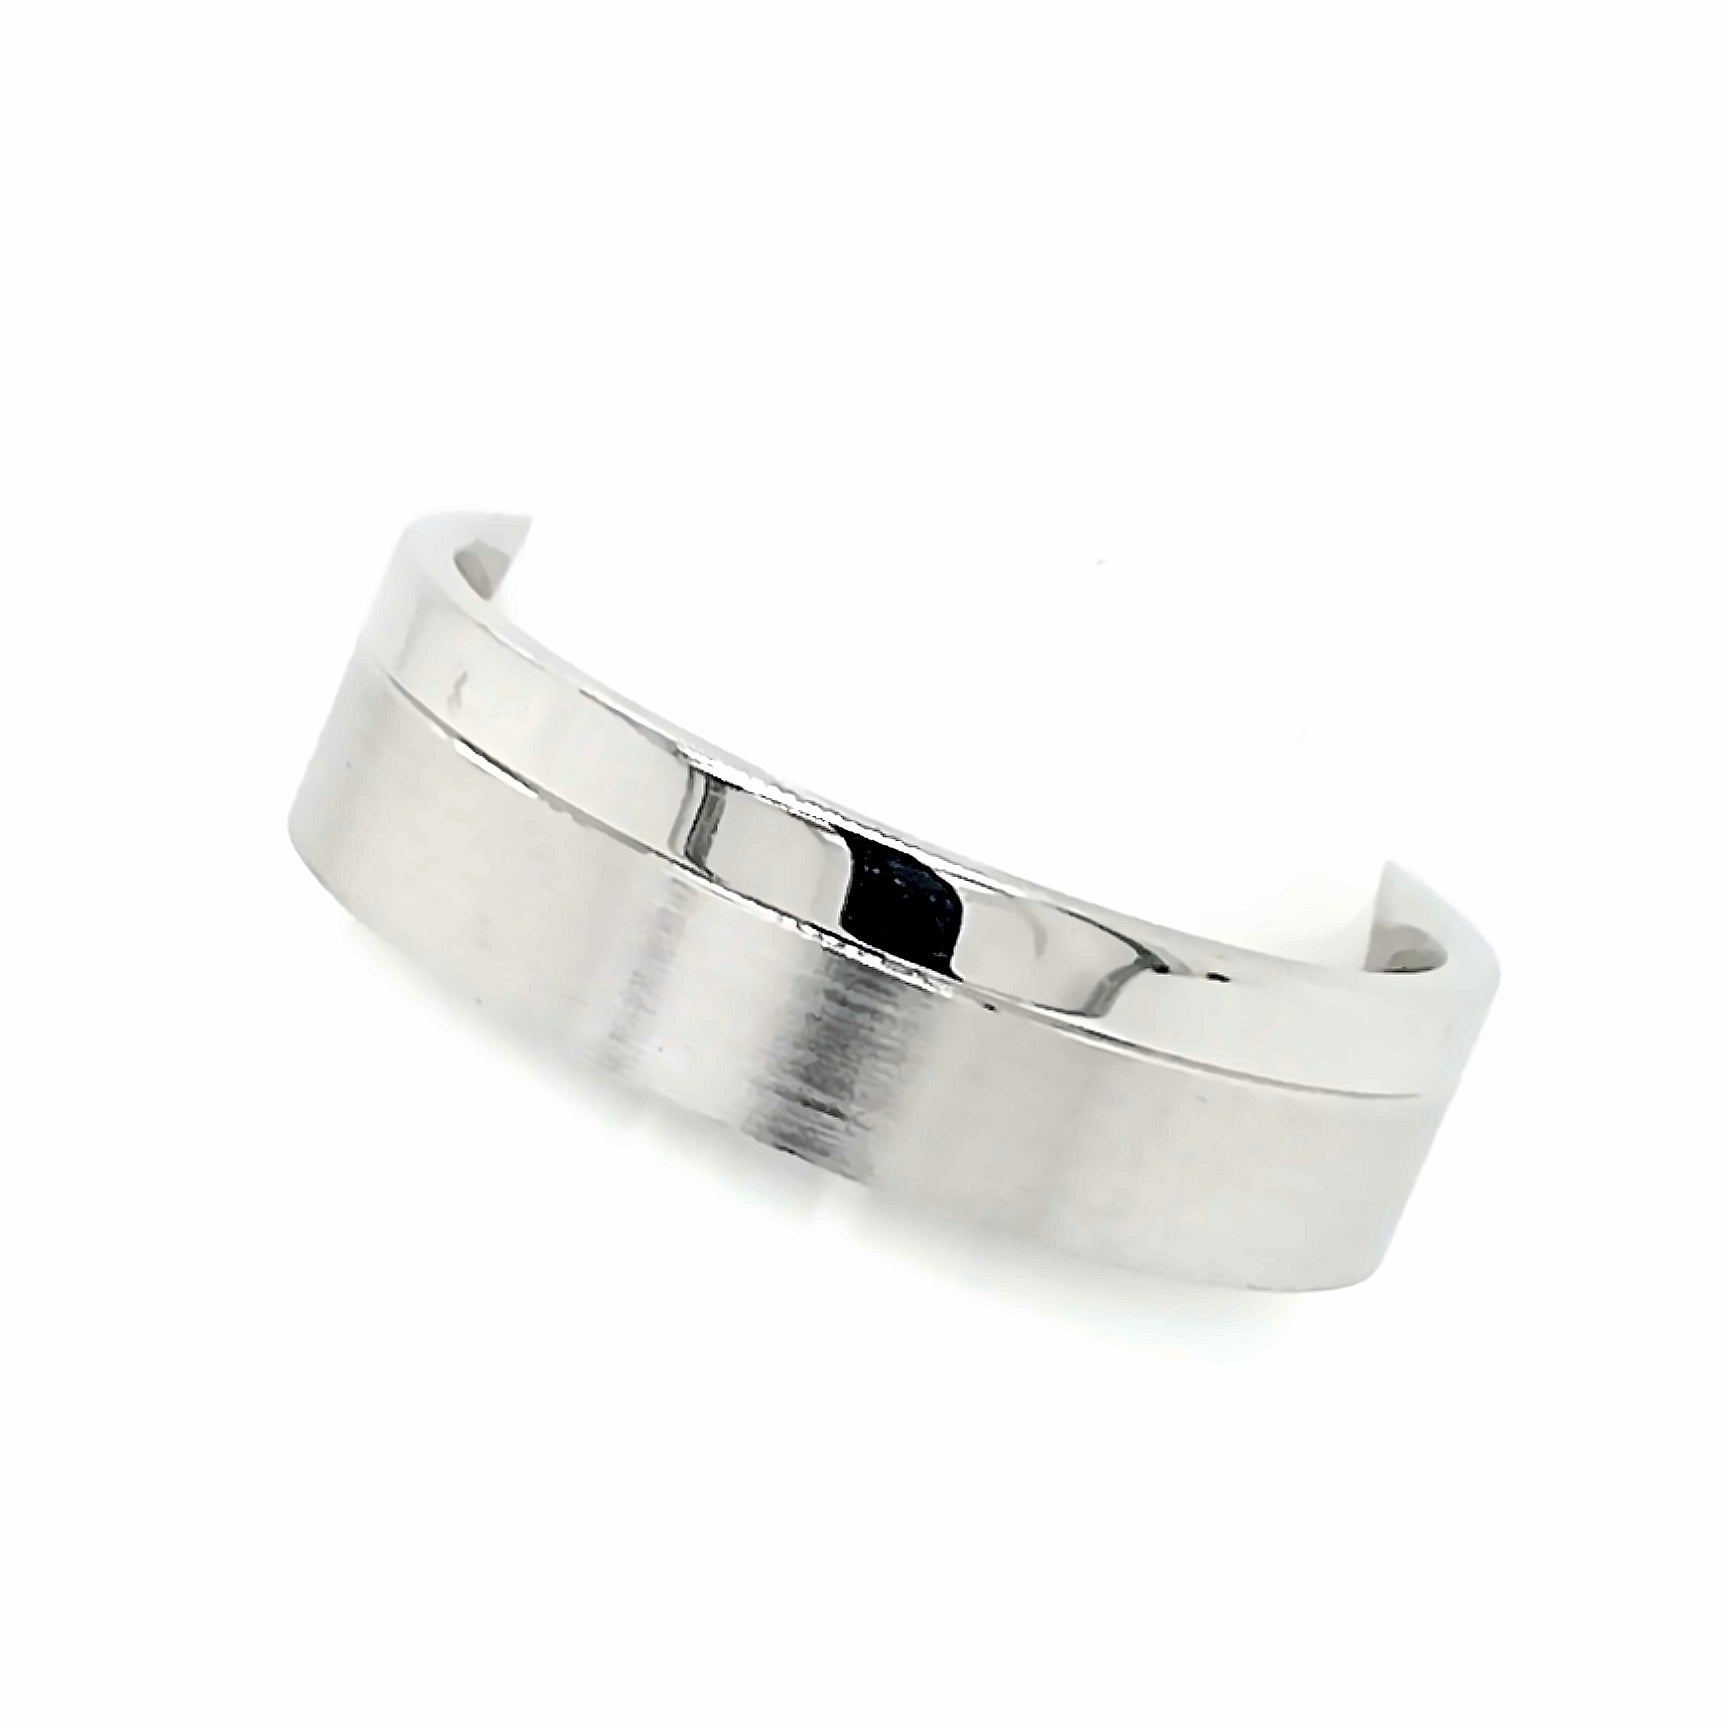 White Gold Satin and Polished Mens Wedding Ring